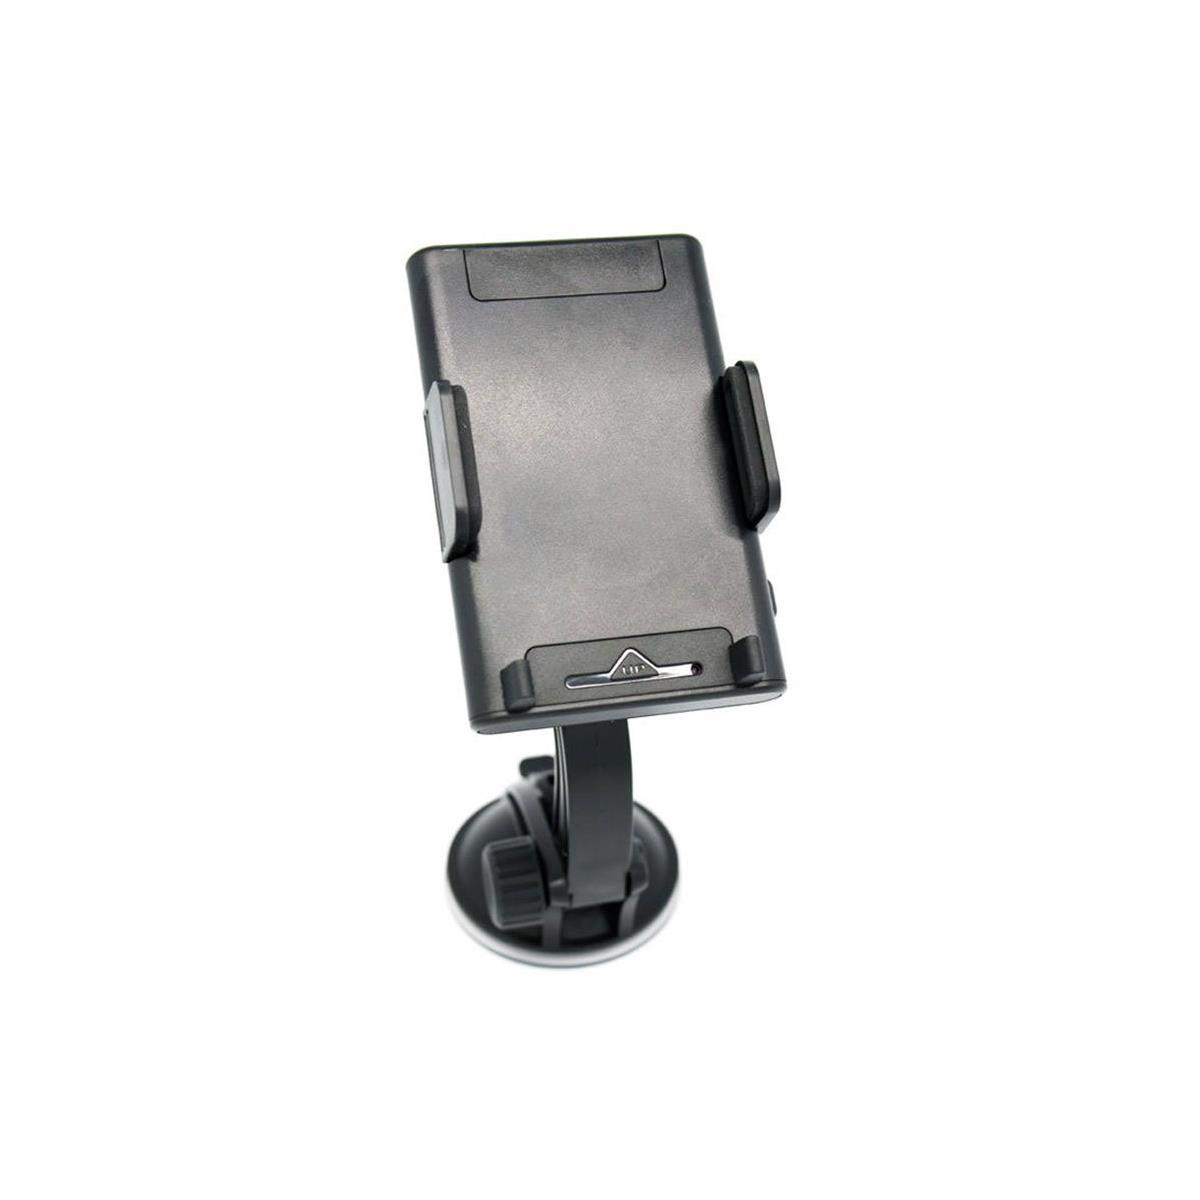 Image of KJB Security Products Lawmate DVR276 Cellphone Holder with 1080p Camera and DVR